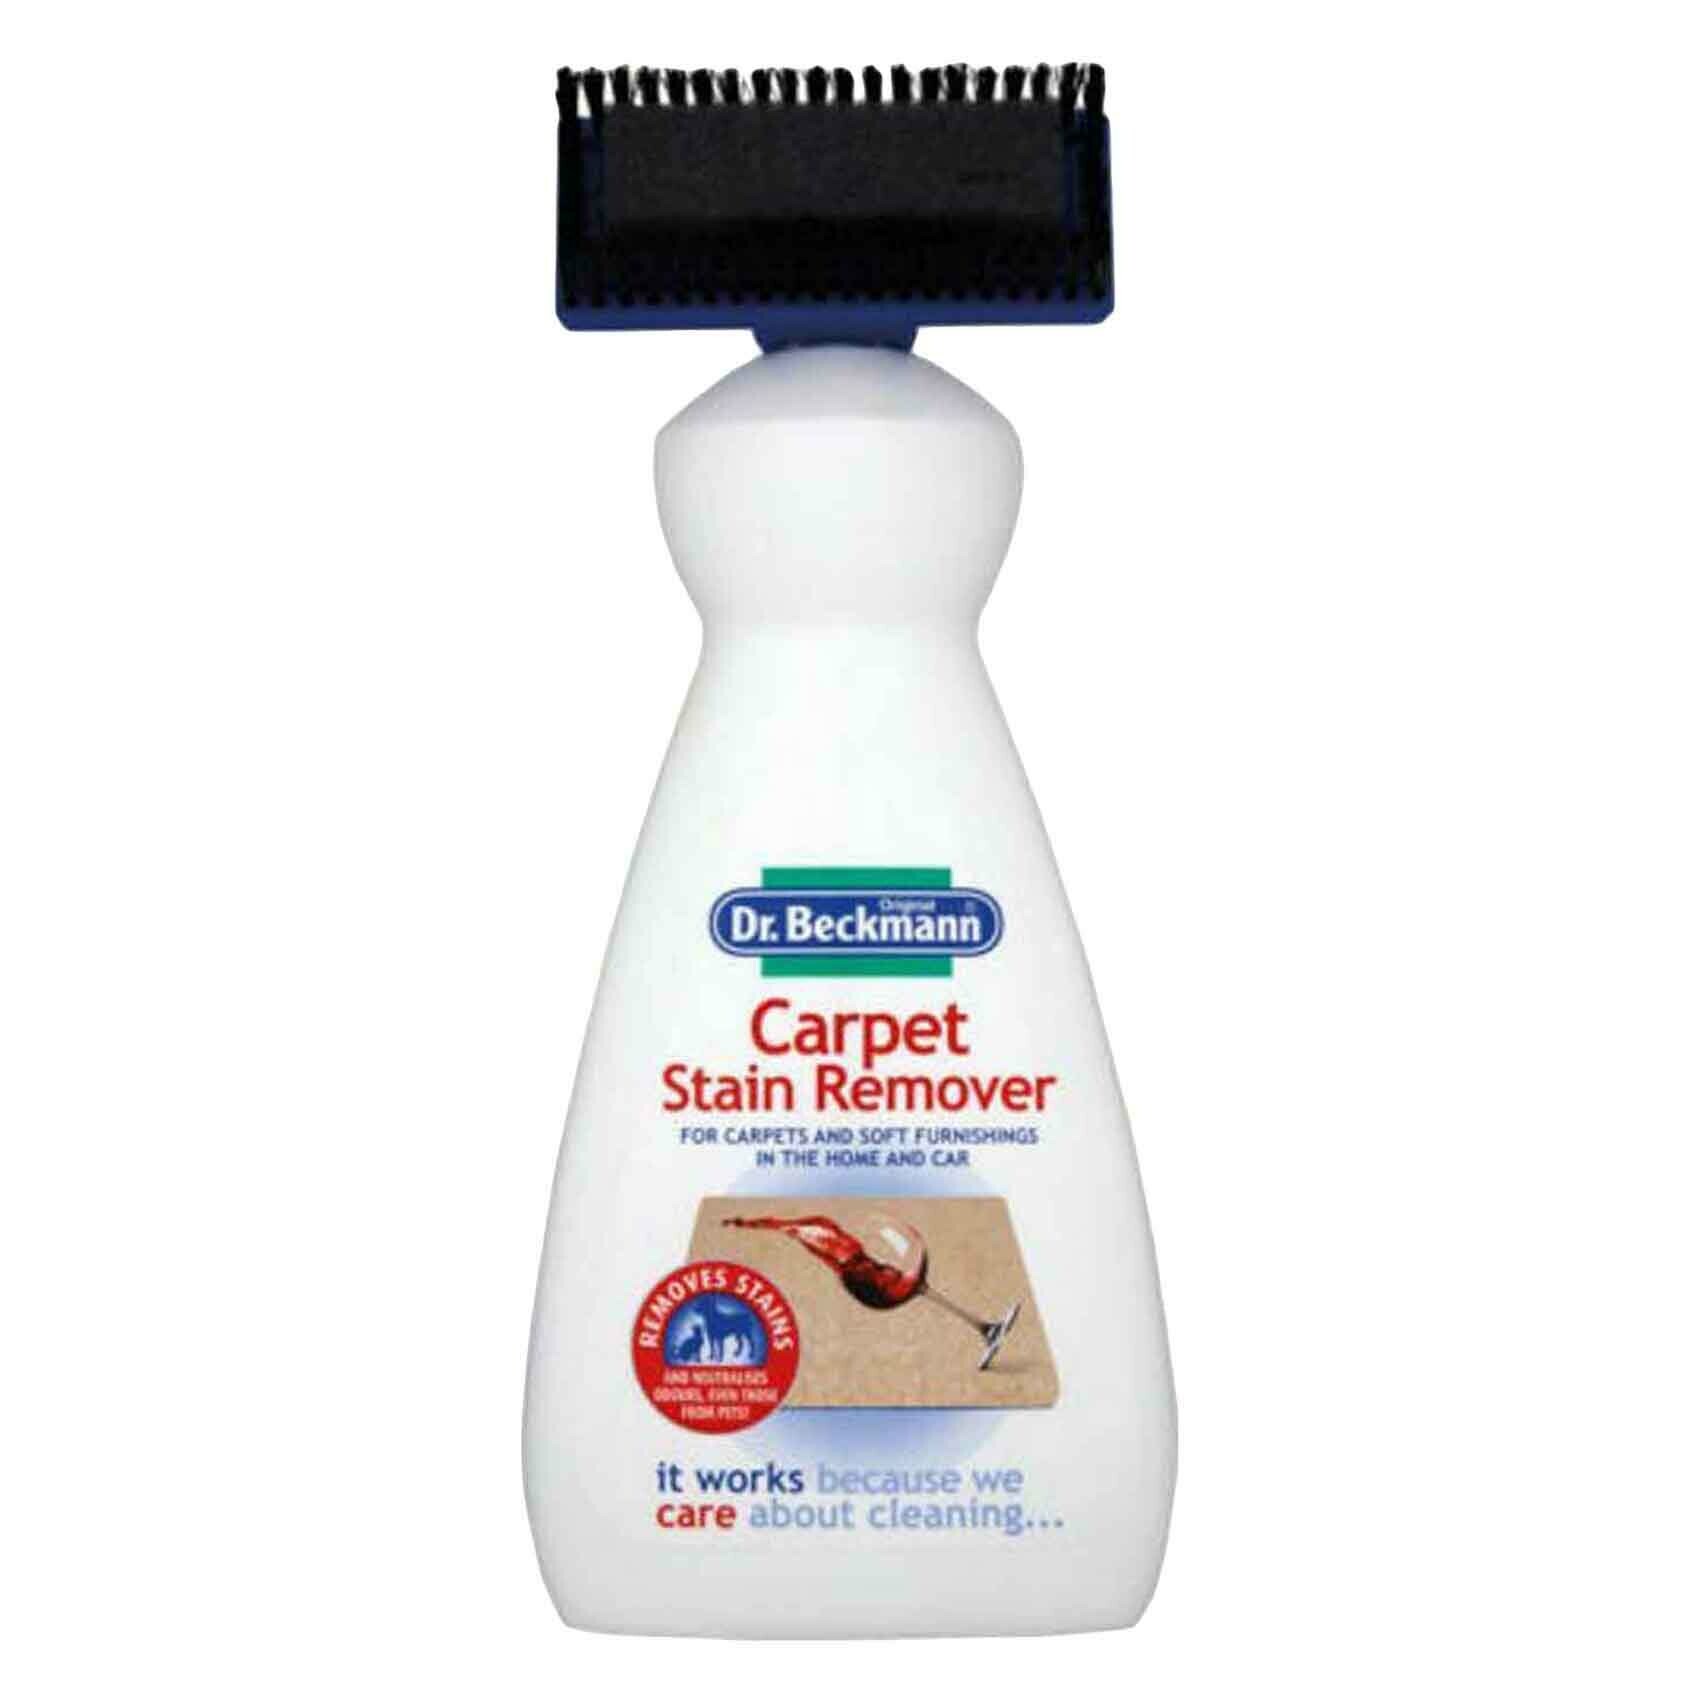 Buy Dr. Beckmann Carpet Stain Remover With Applicator 650ml Online - Cleaning & Household on Carrefour